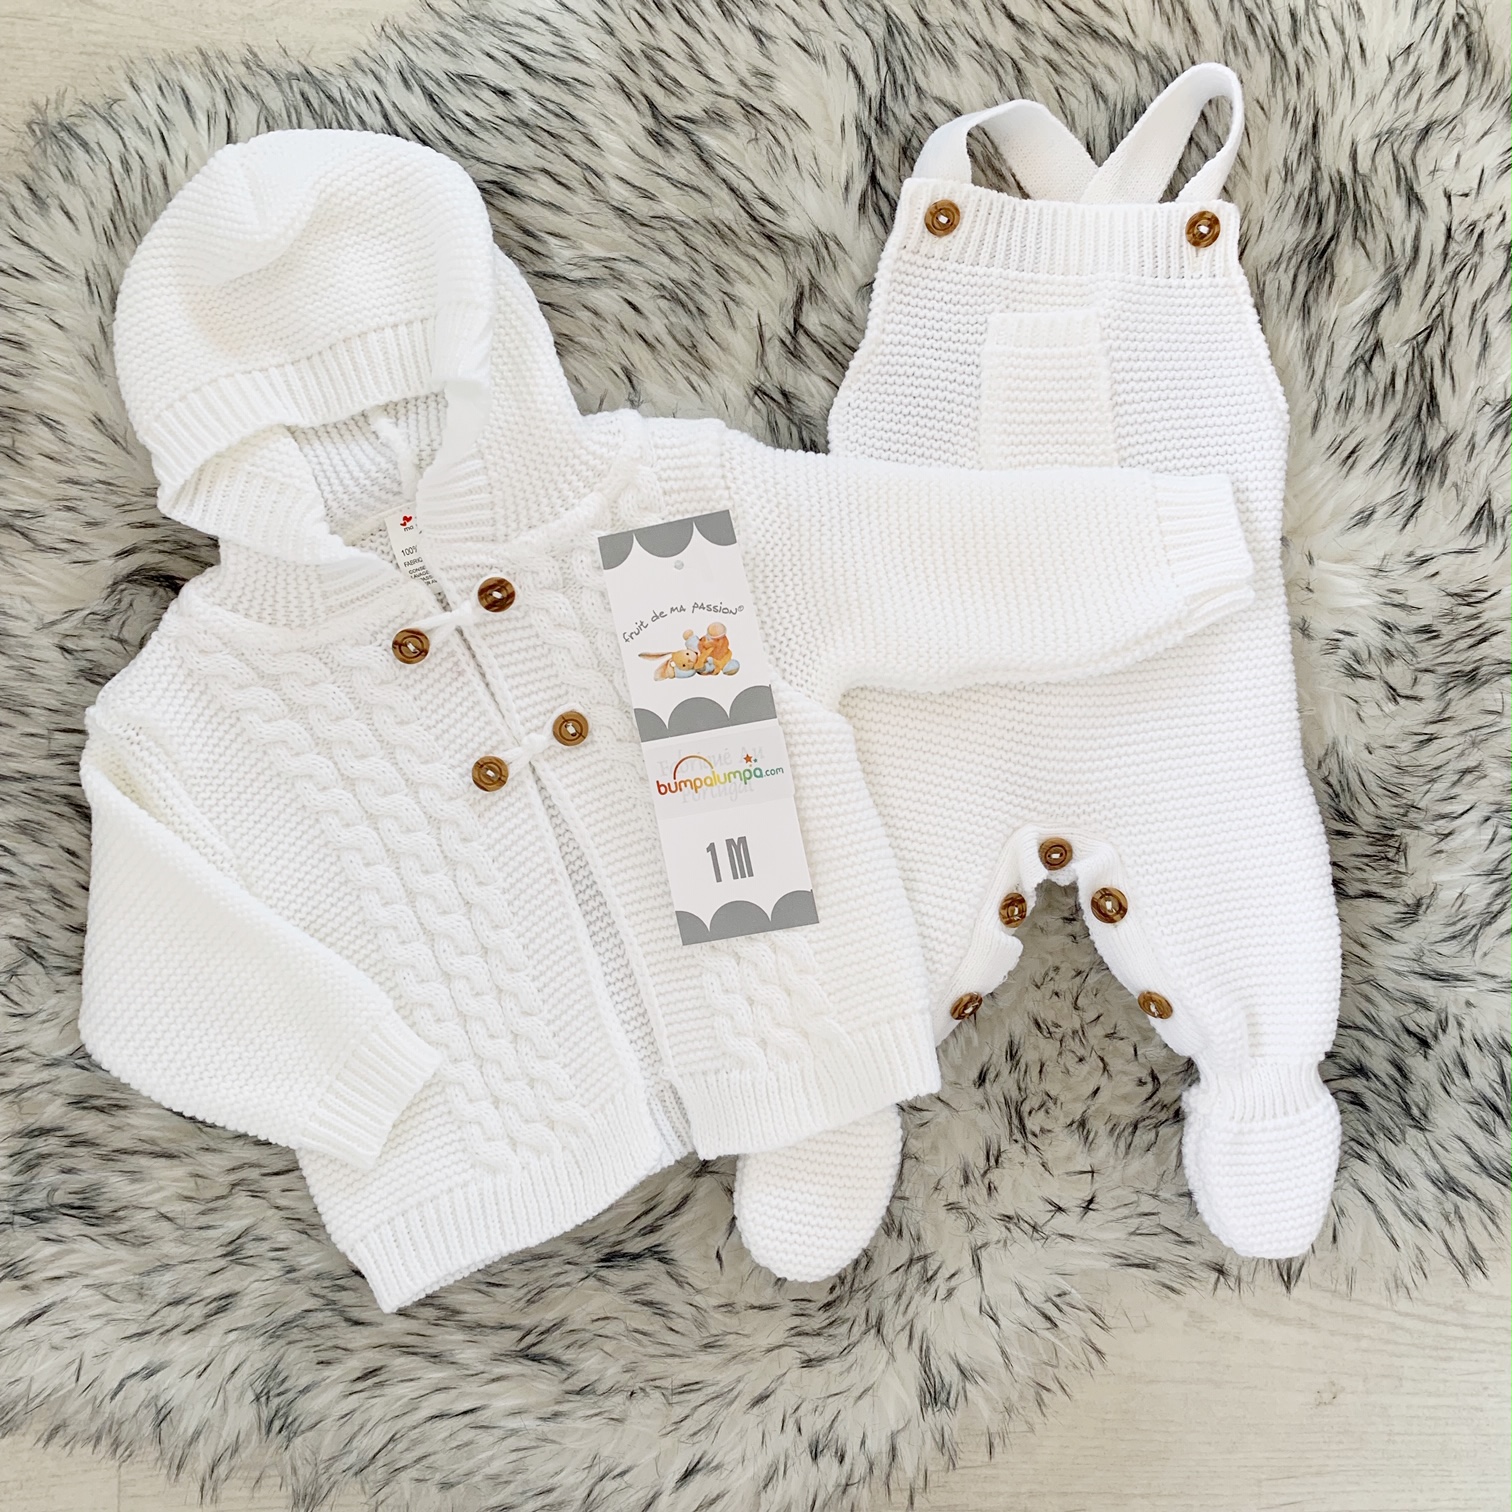 unisex knitted baby clothes